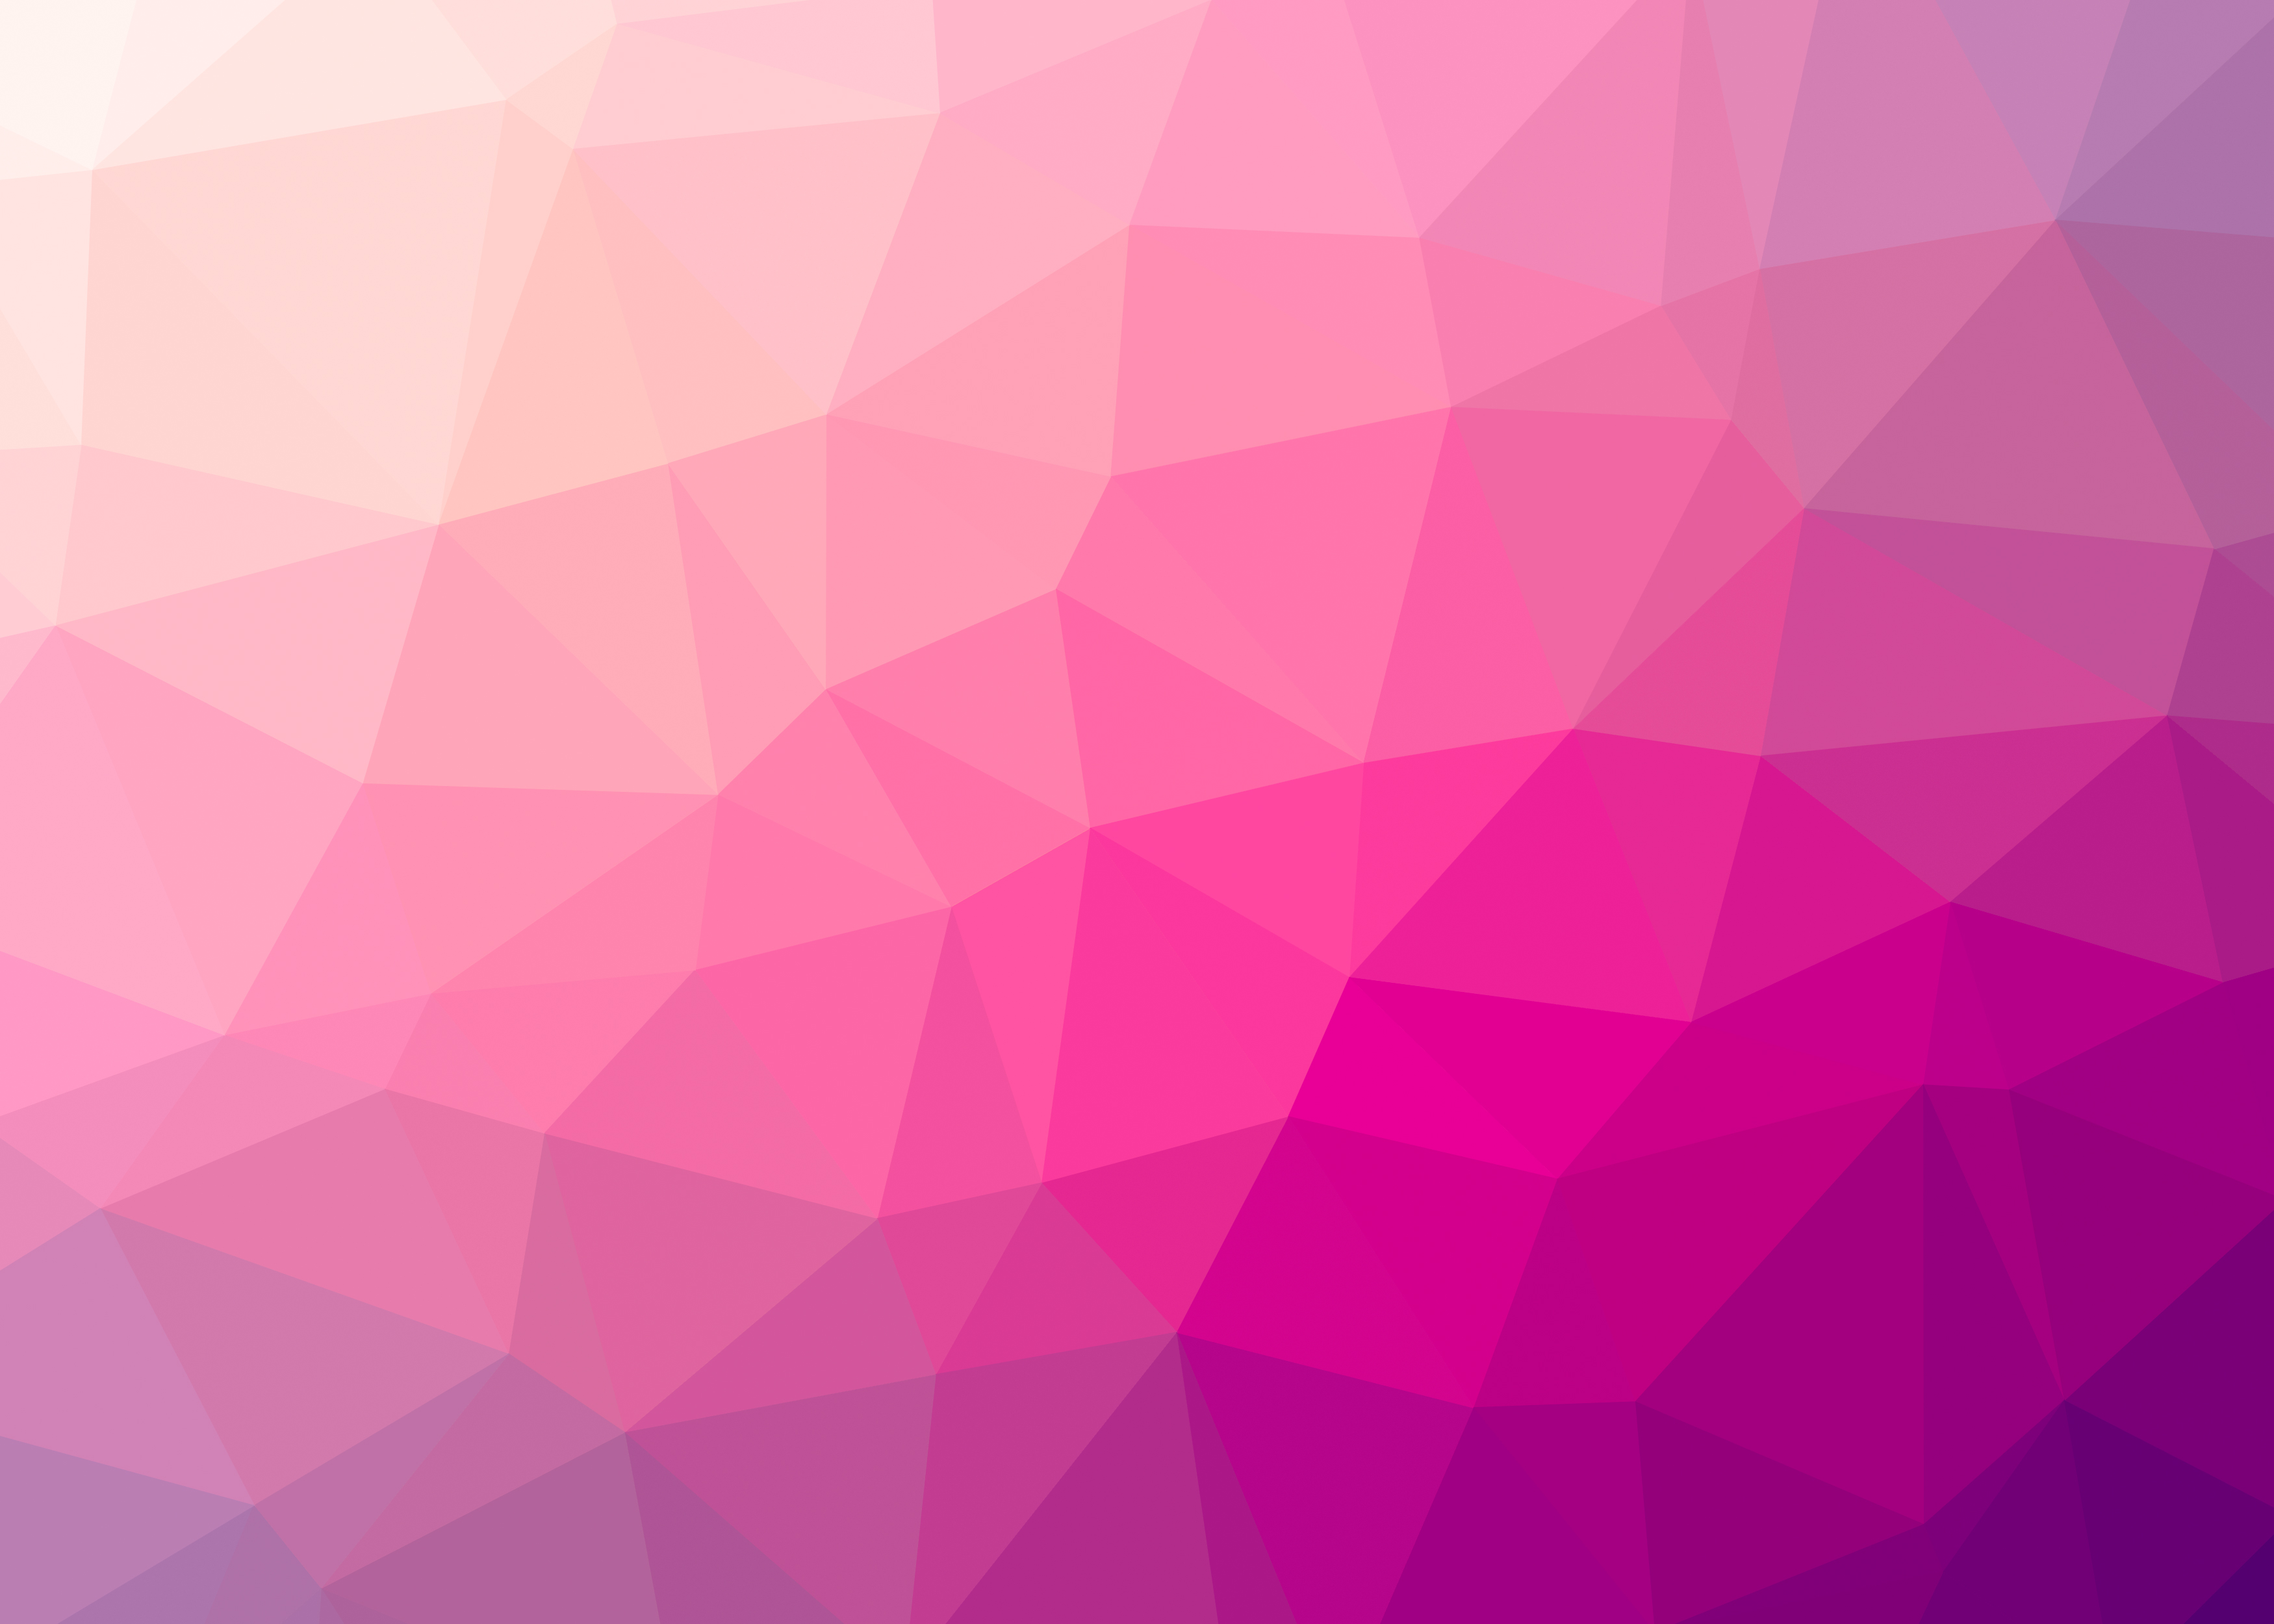 Abstract Geometric Wallpaper Royalty Free Photo